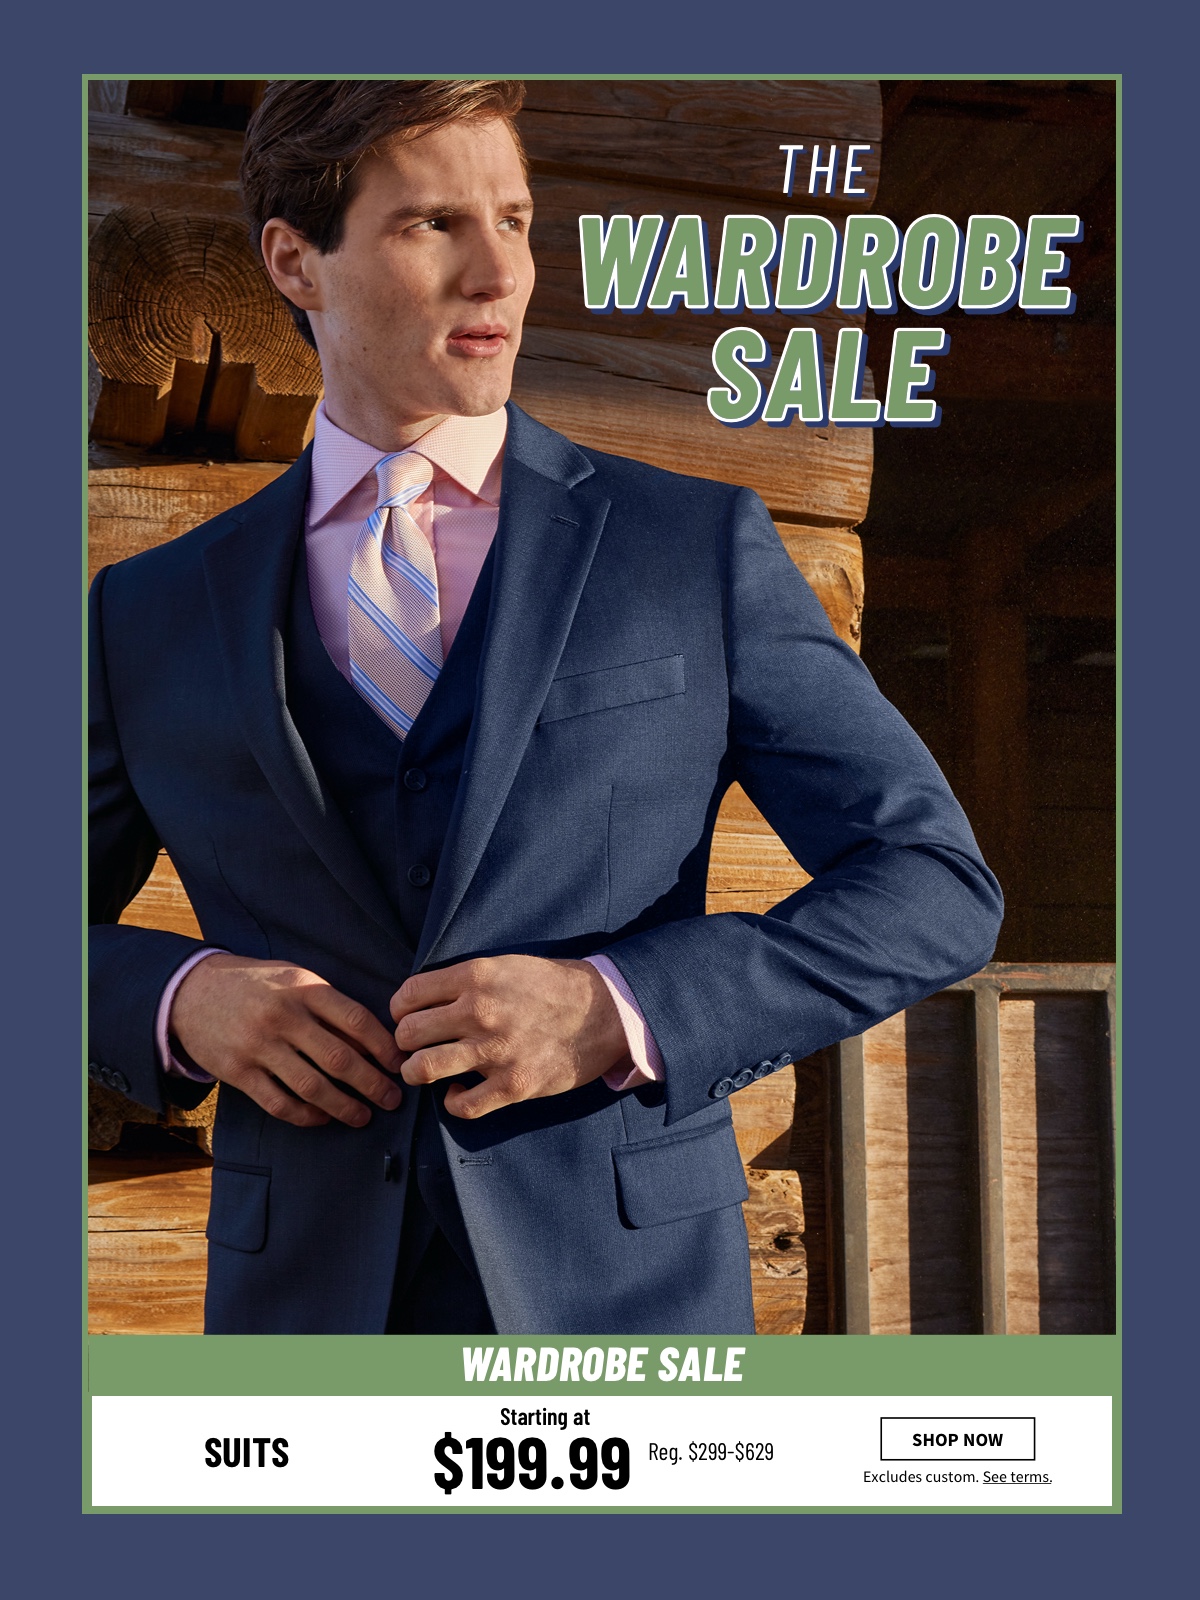 Suits Starting at $199.99